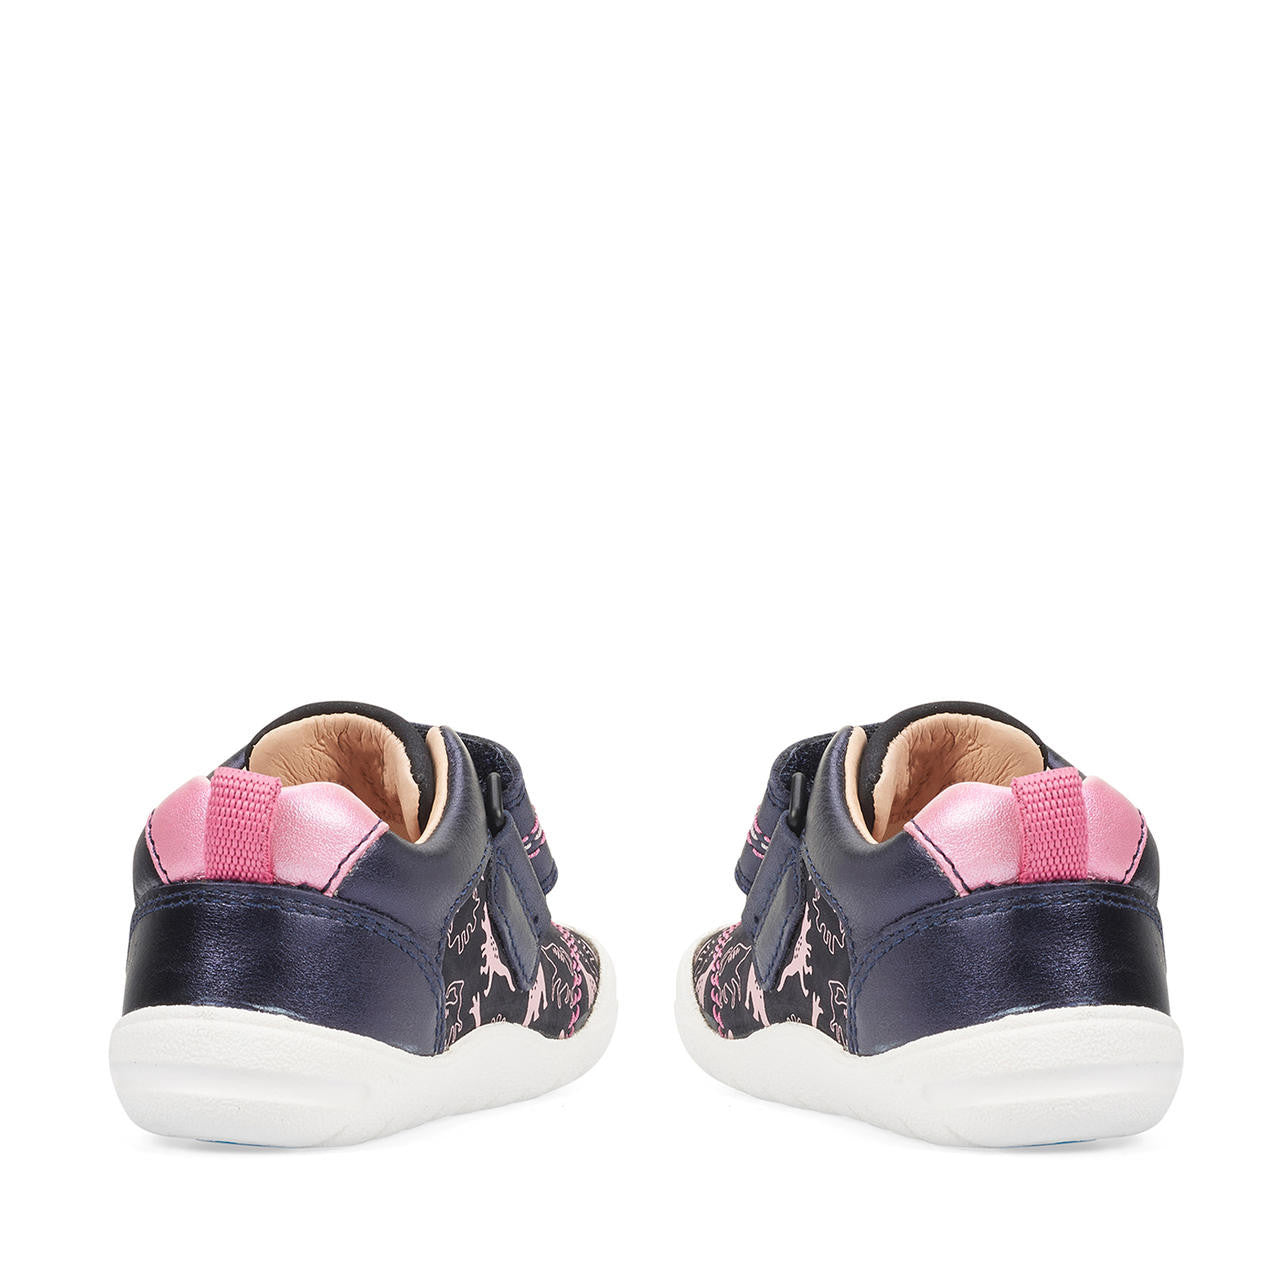 A pair of girls casual shoes by Start Rite, style Footprint, in navy and pink nubuck and leather with velcro fastening. Back view.